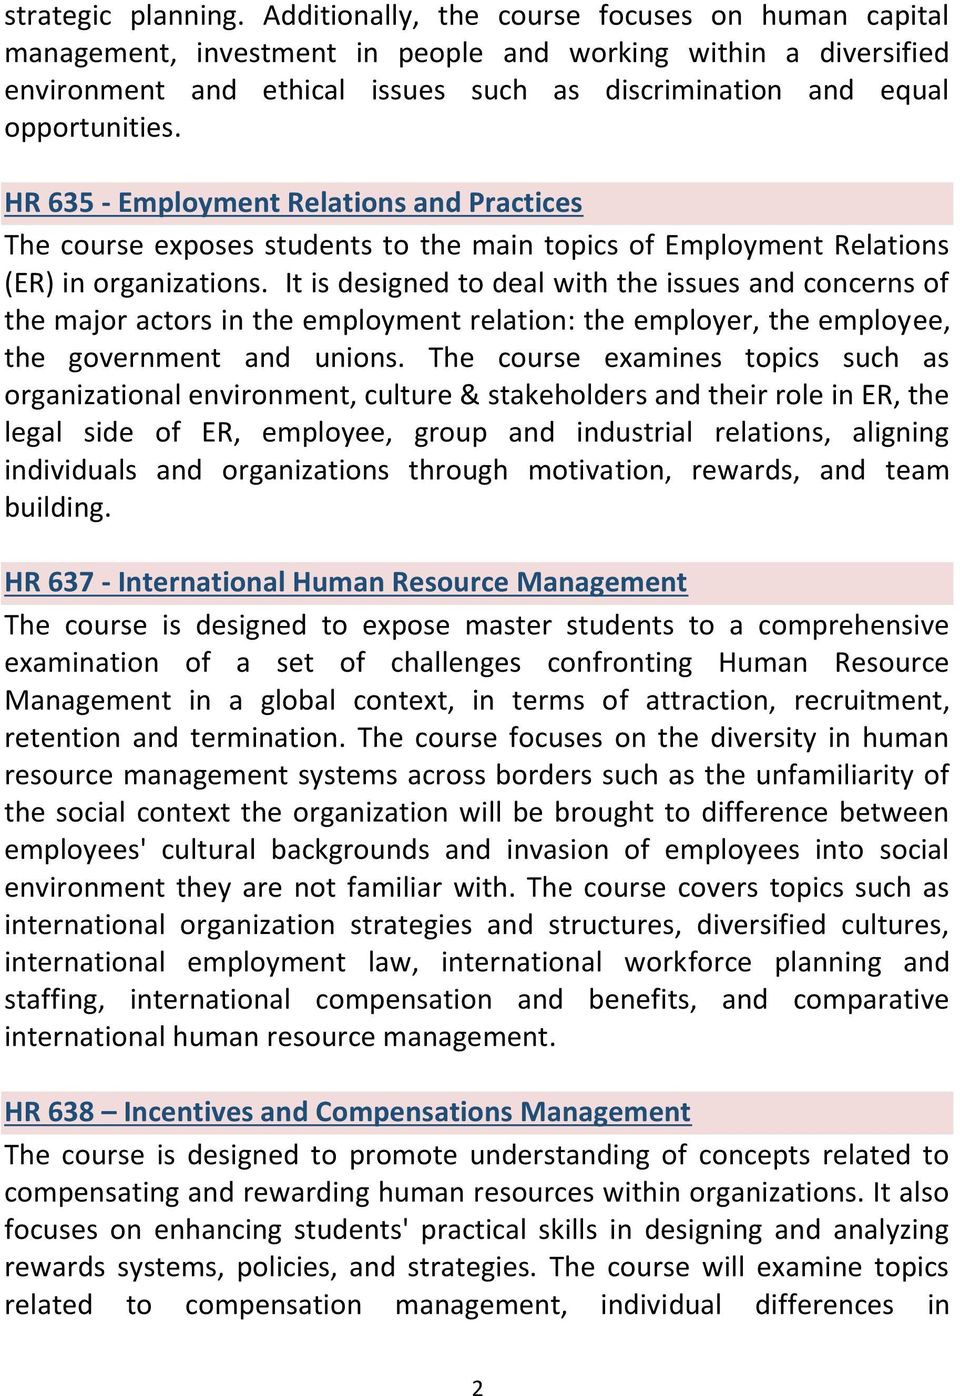 HR 635 - Employment Relations and Practices The course exposes students to the main topics of Employment Relations (ER) in organizations.